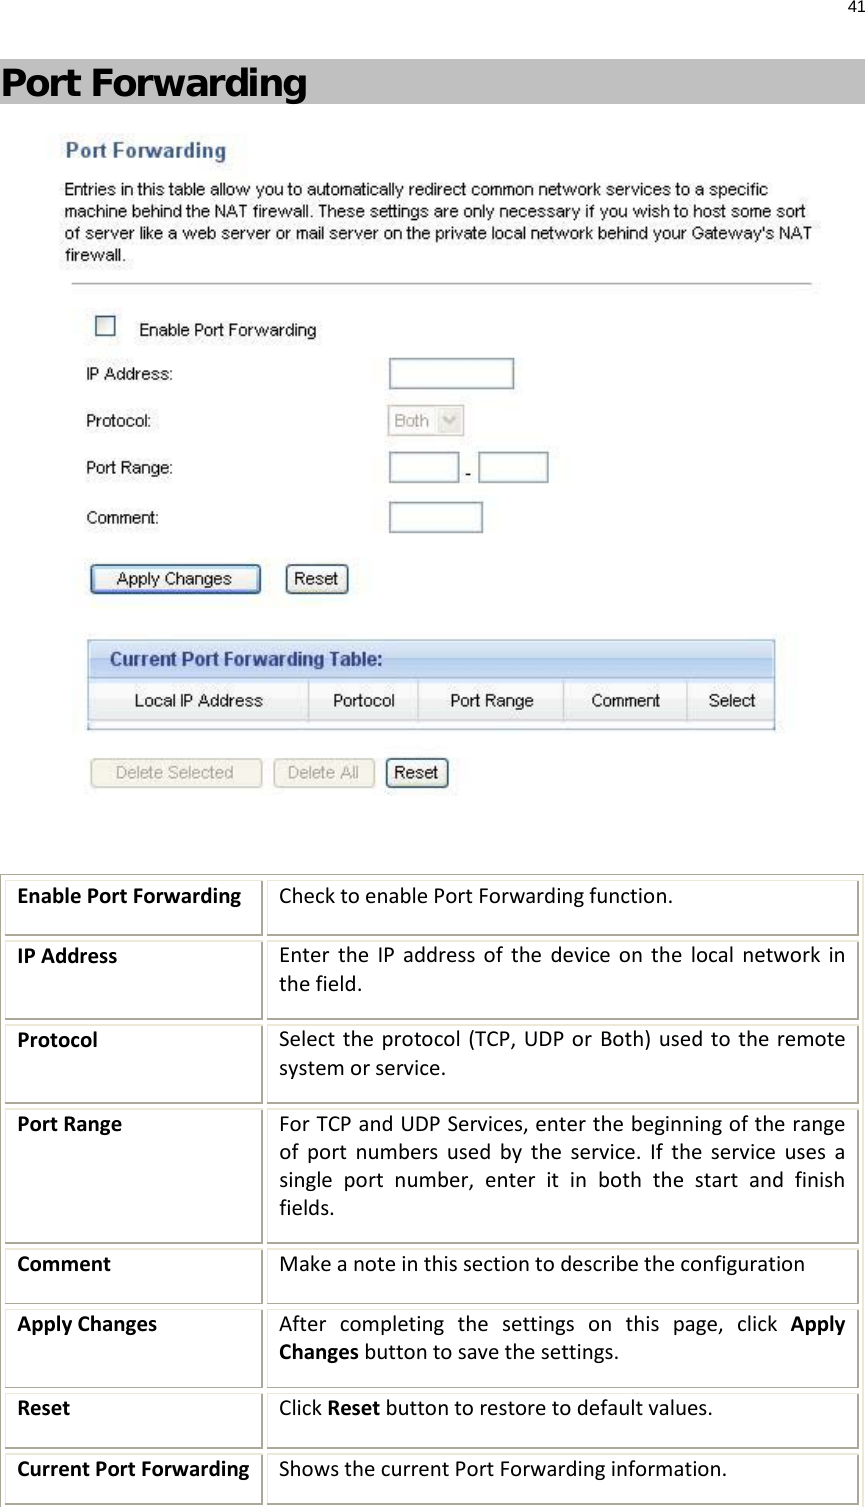 41  Port Forwarding   Enable Port Forwarding Check to enable Port Forwarding function. IP Address Enter the IP  address of the device on the local network in the field.   Protocol Select the protocol (TCP, UDP or Both) used to the remote system or service. Port Range For TCP and UDP Services, enter the beginning of the range of port numbers used by the service. If the service uses a single port number, enter it in both the start and finish fields. Comment Make a note in this section to describe the configuration Apply Changes After completing the settings on this page, click Apply Changes button to save the settings. Reset Click Reset button to restore to default values. Current Port Forwarding Shows the current Port Forwarding information. 